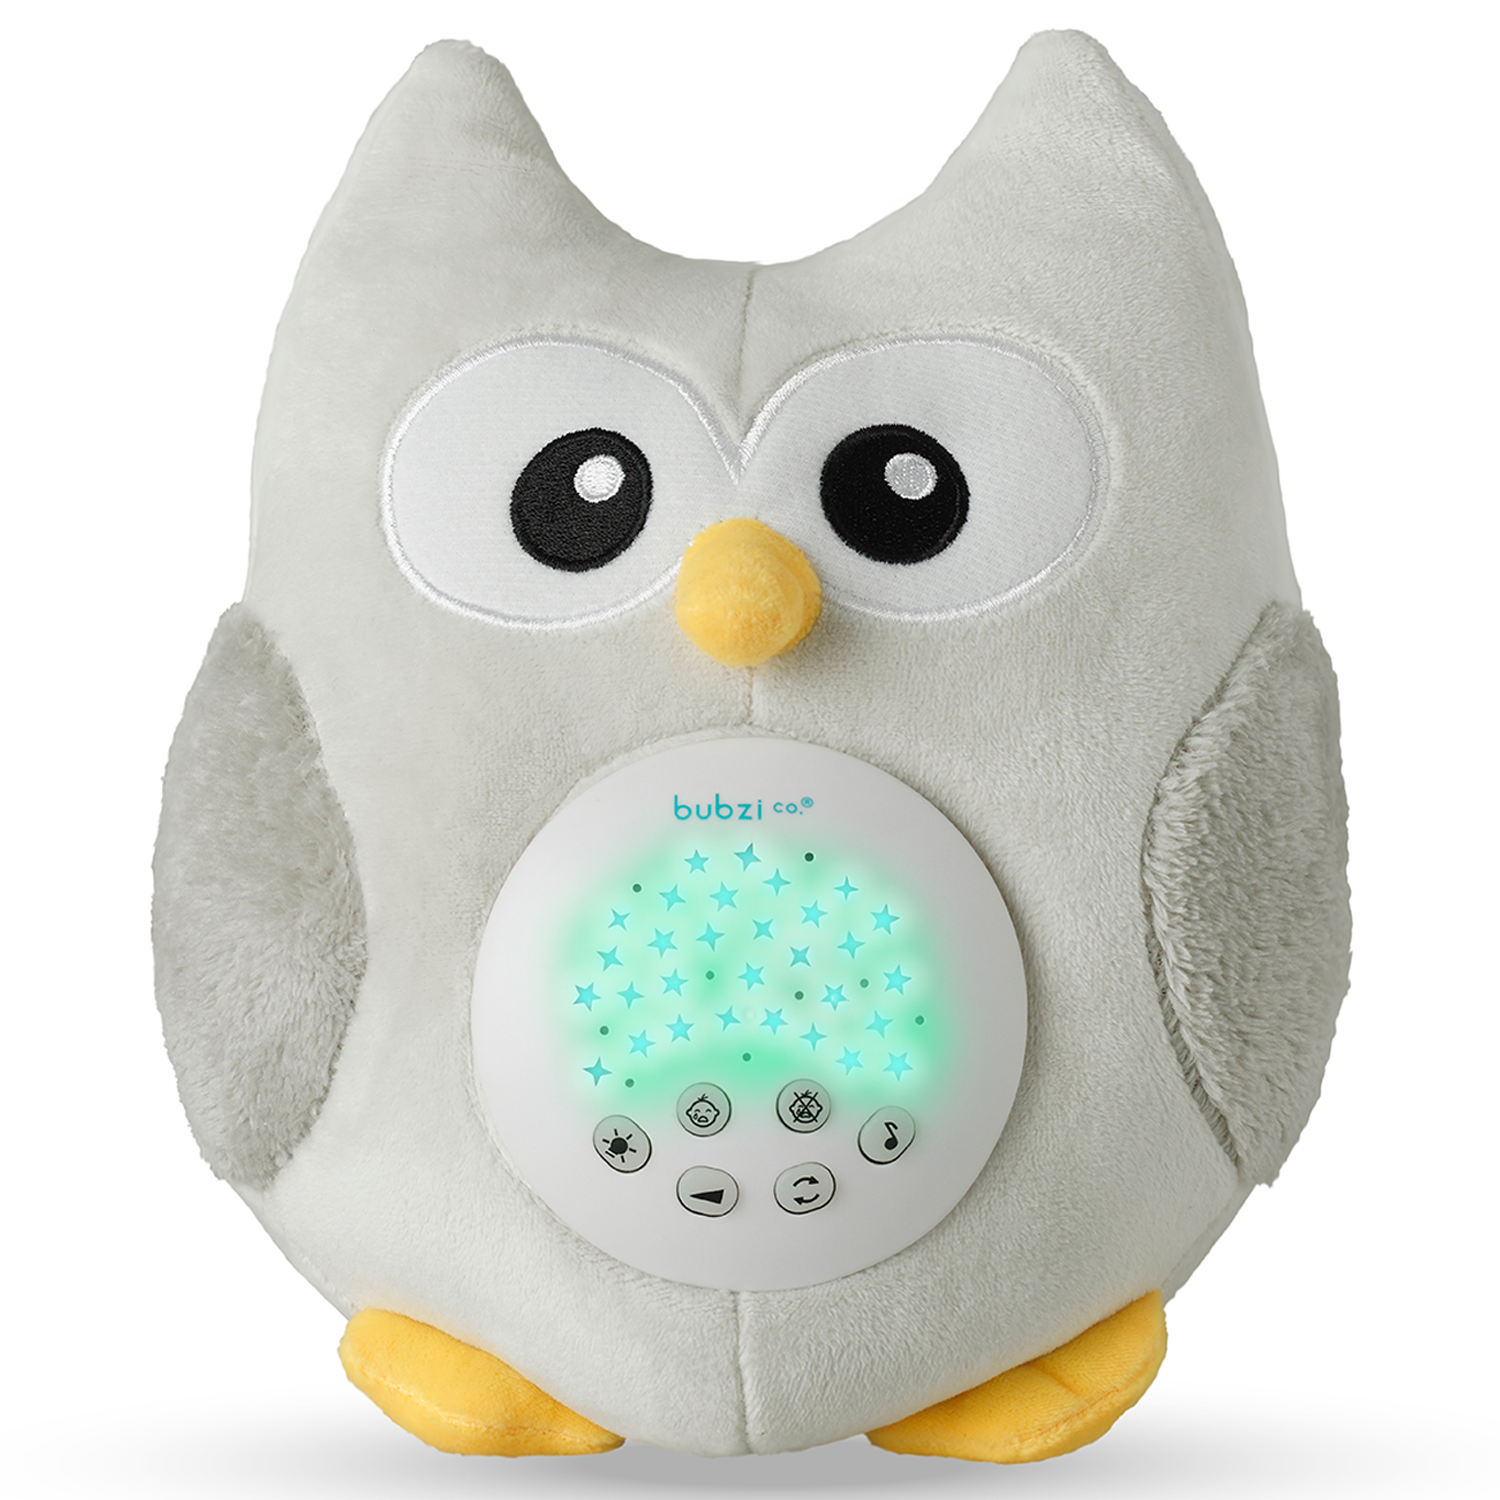 Best Baby Sound Machines for Soothing Sleep